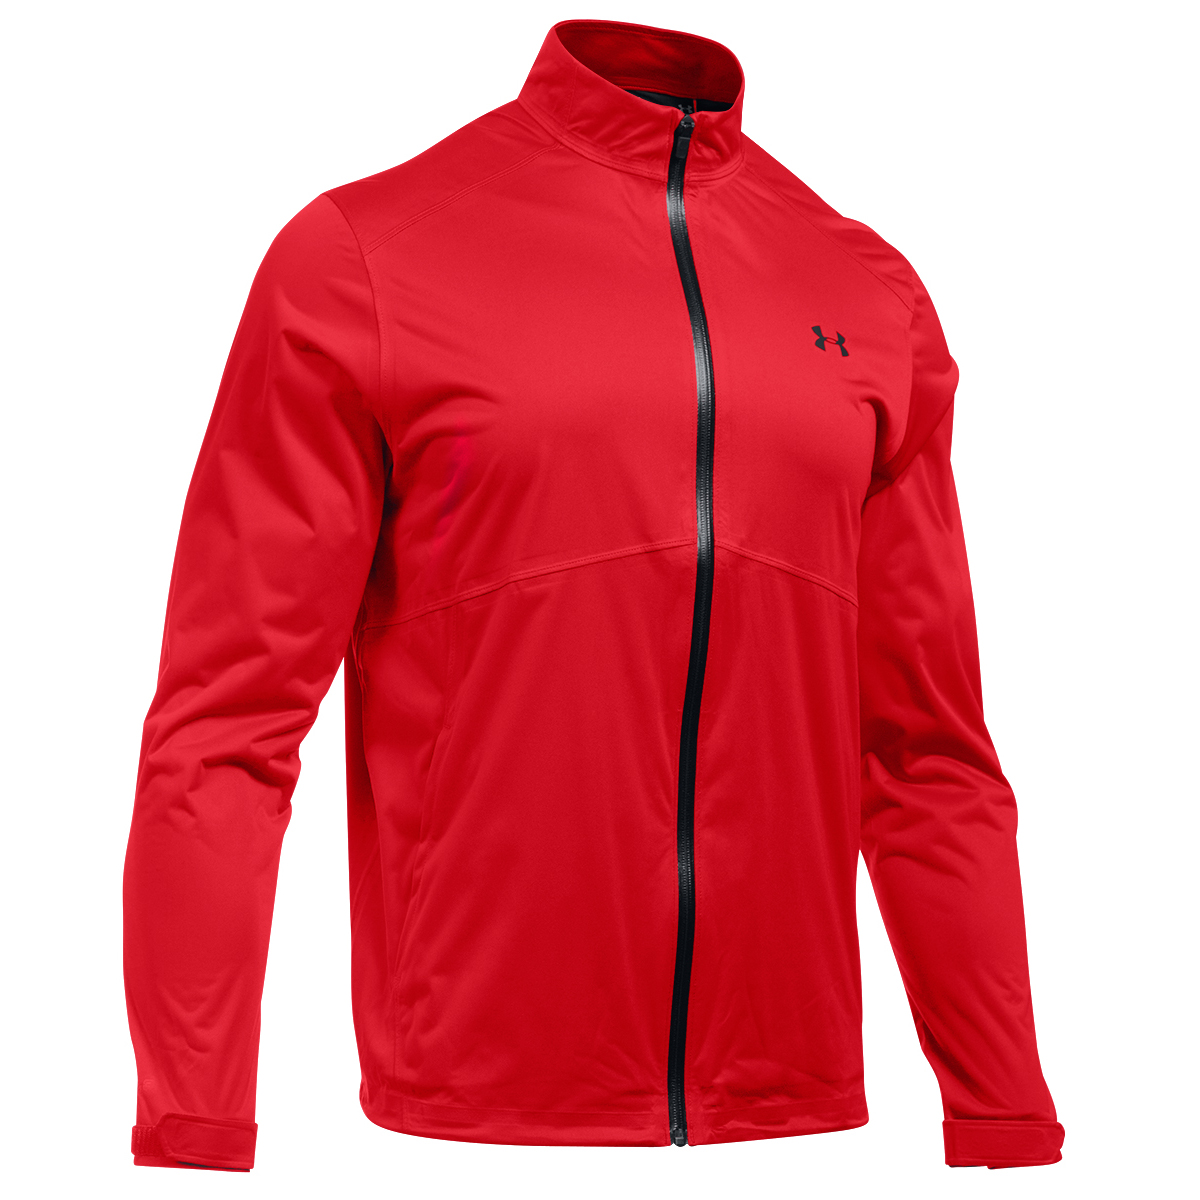 Under Armour Storm 3 Waterproof Jacket from american golf